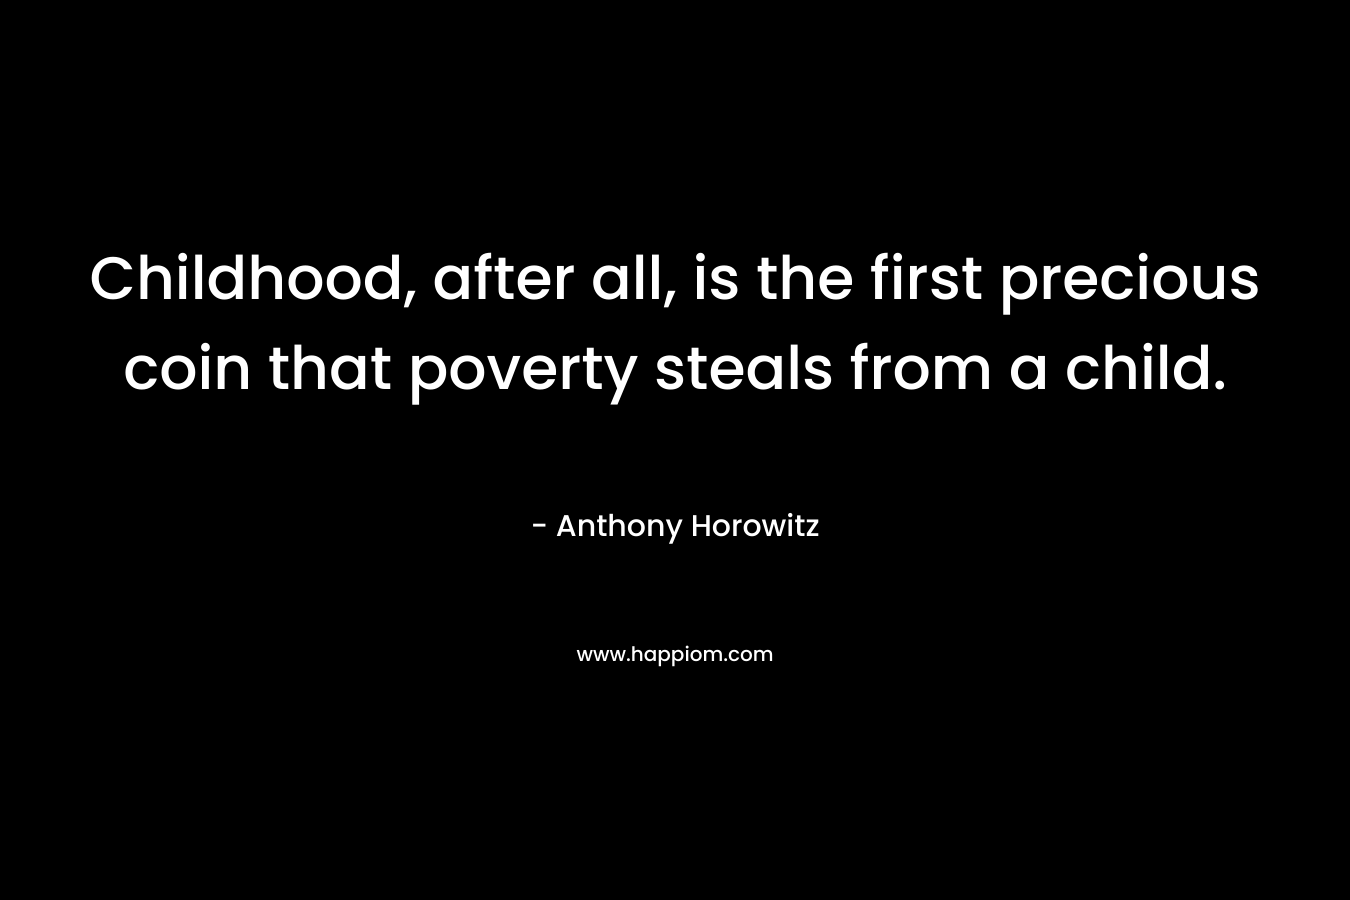 Childhood, after all, is the first precious coin that poverty steals from a child. – Anthony Horowitz